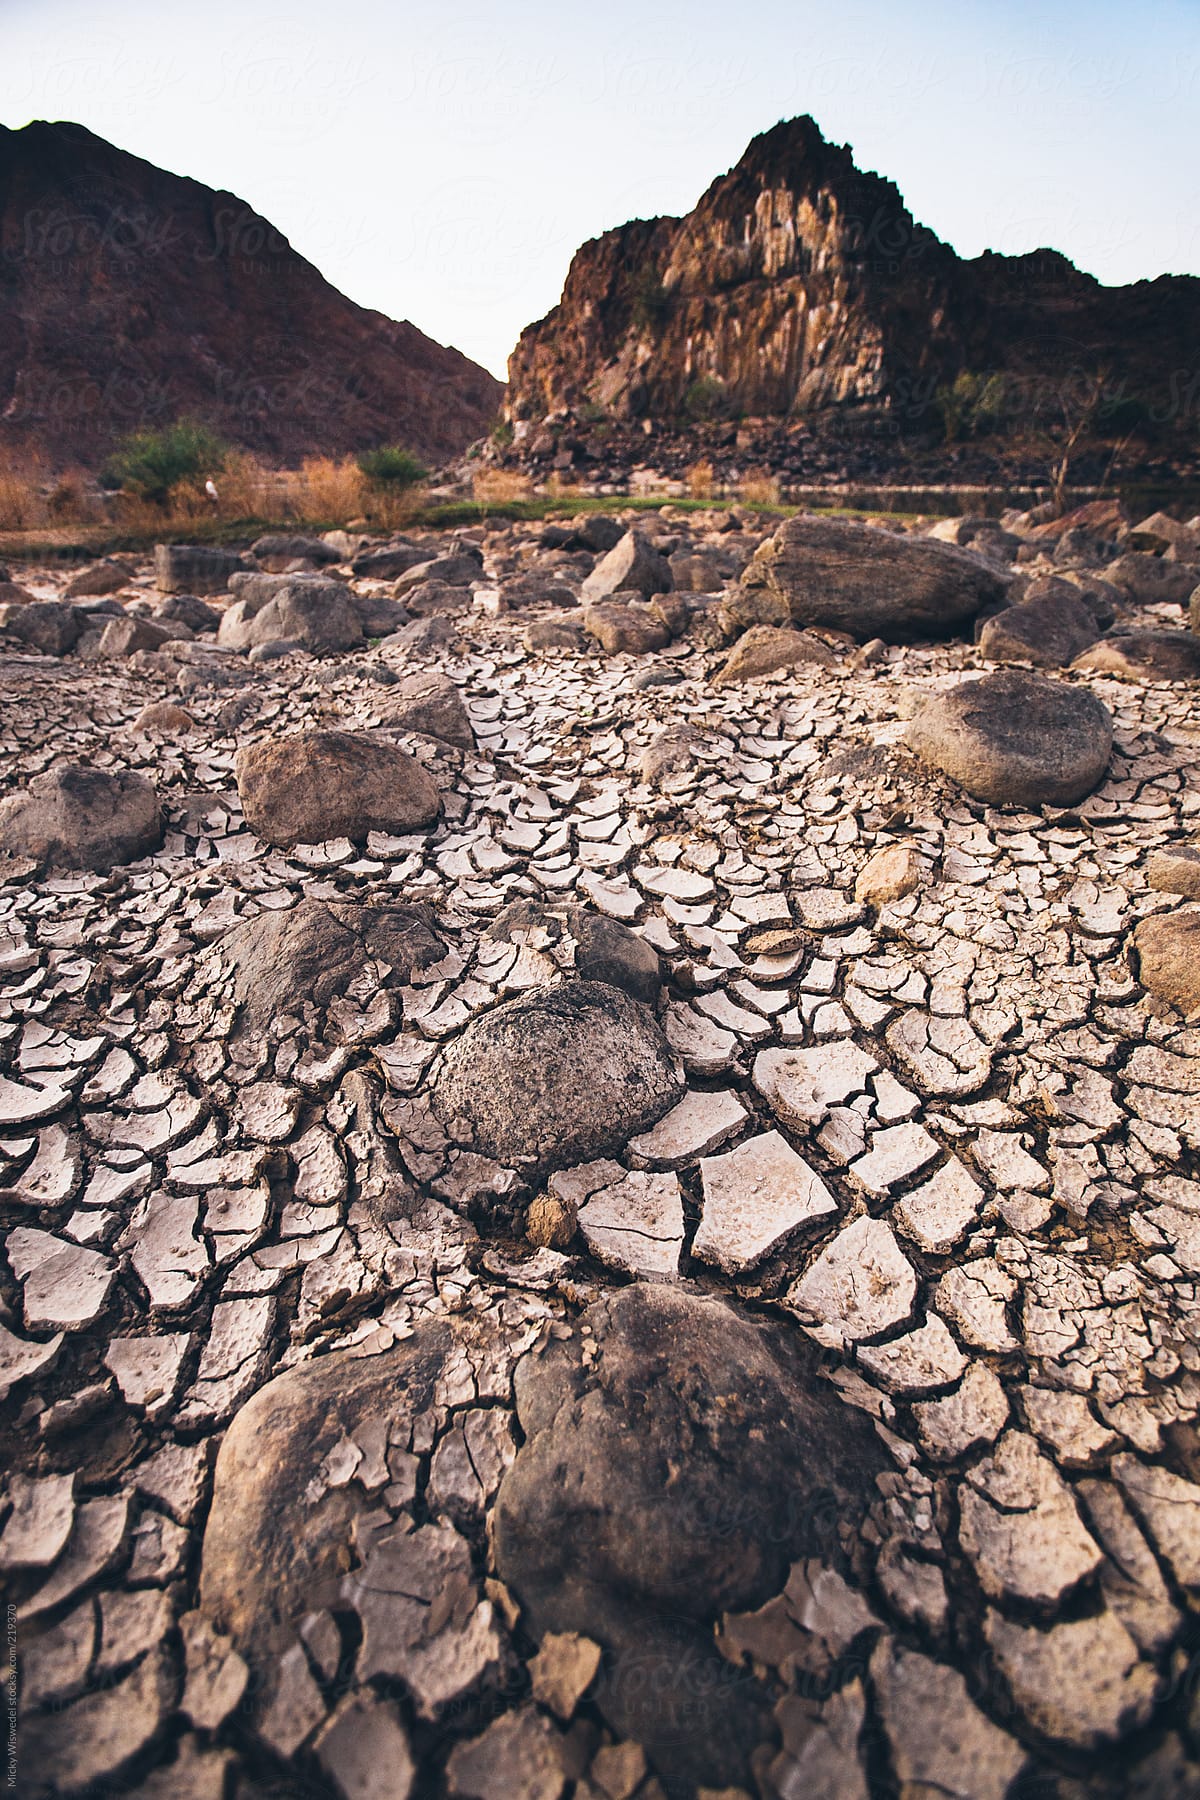 cracked mud and boulders in a dried out river bed